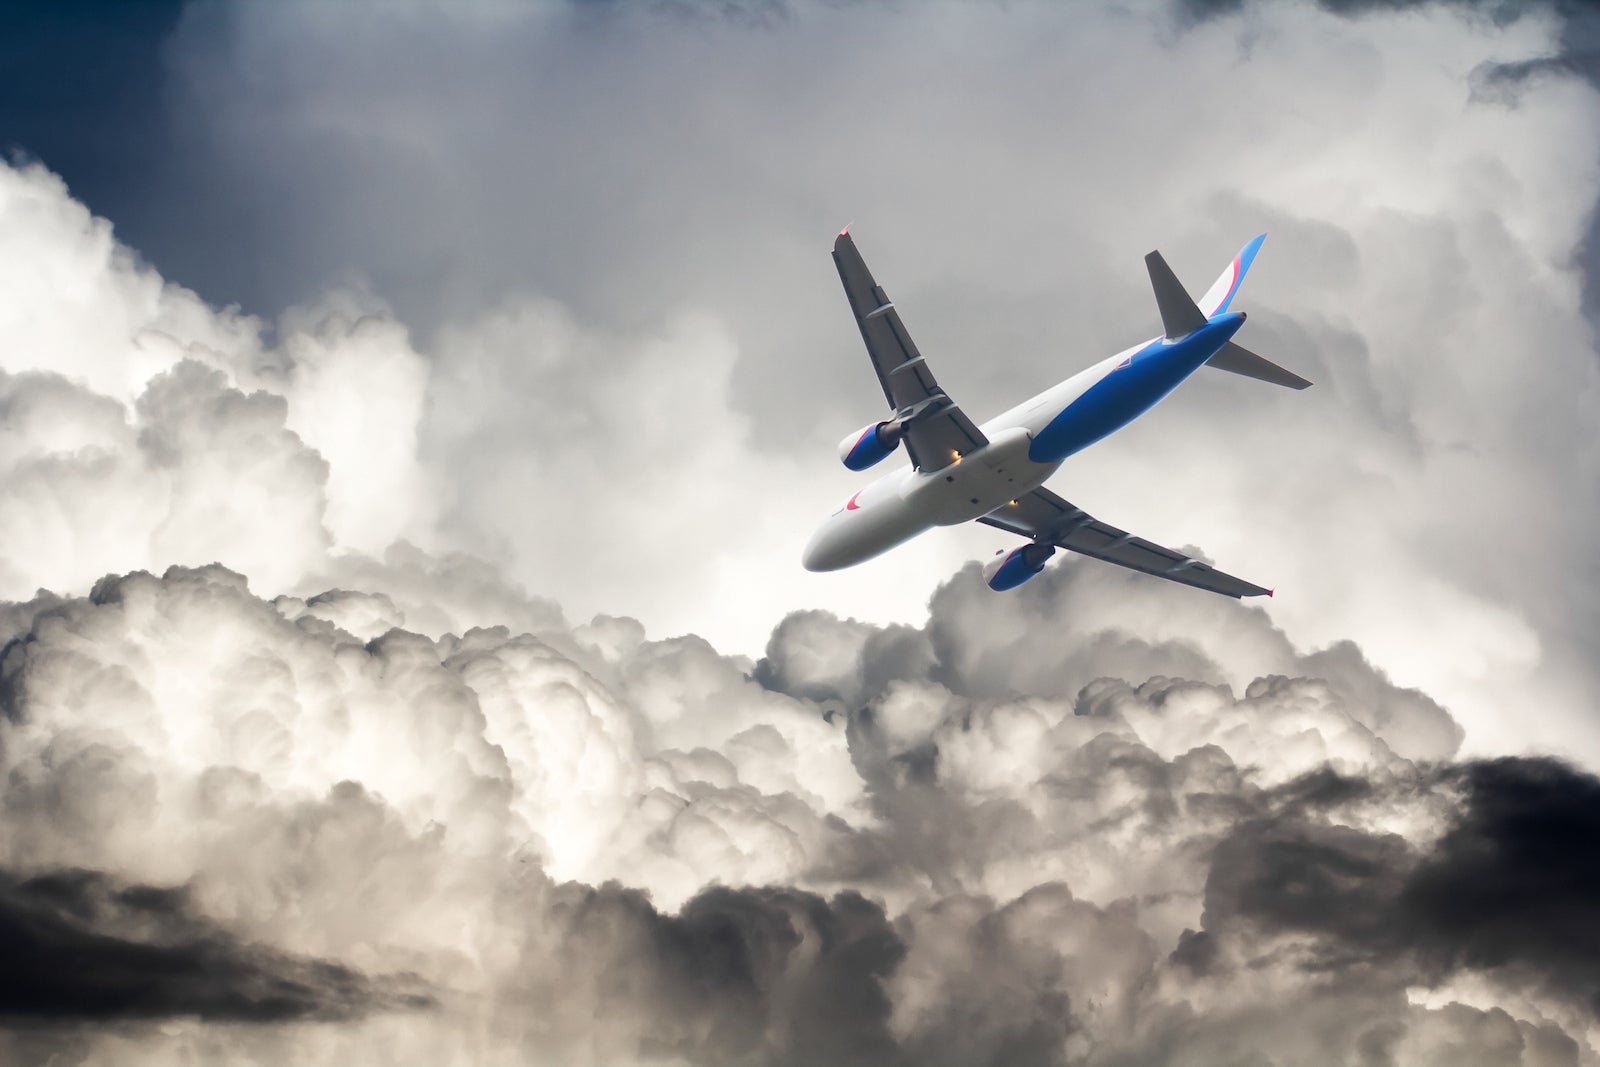 A commercial airplane flies through storm clouds